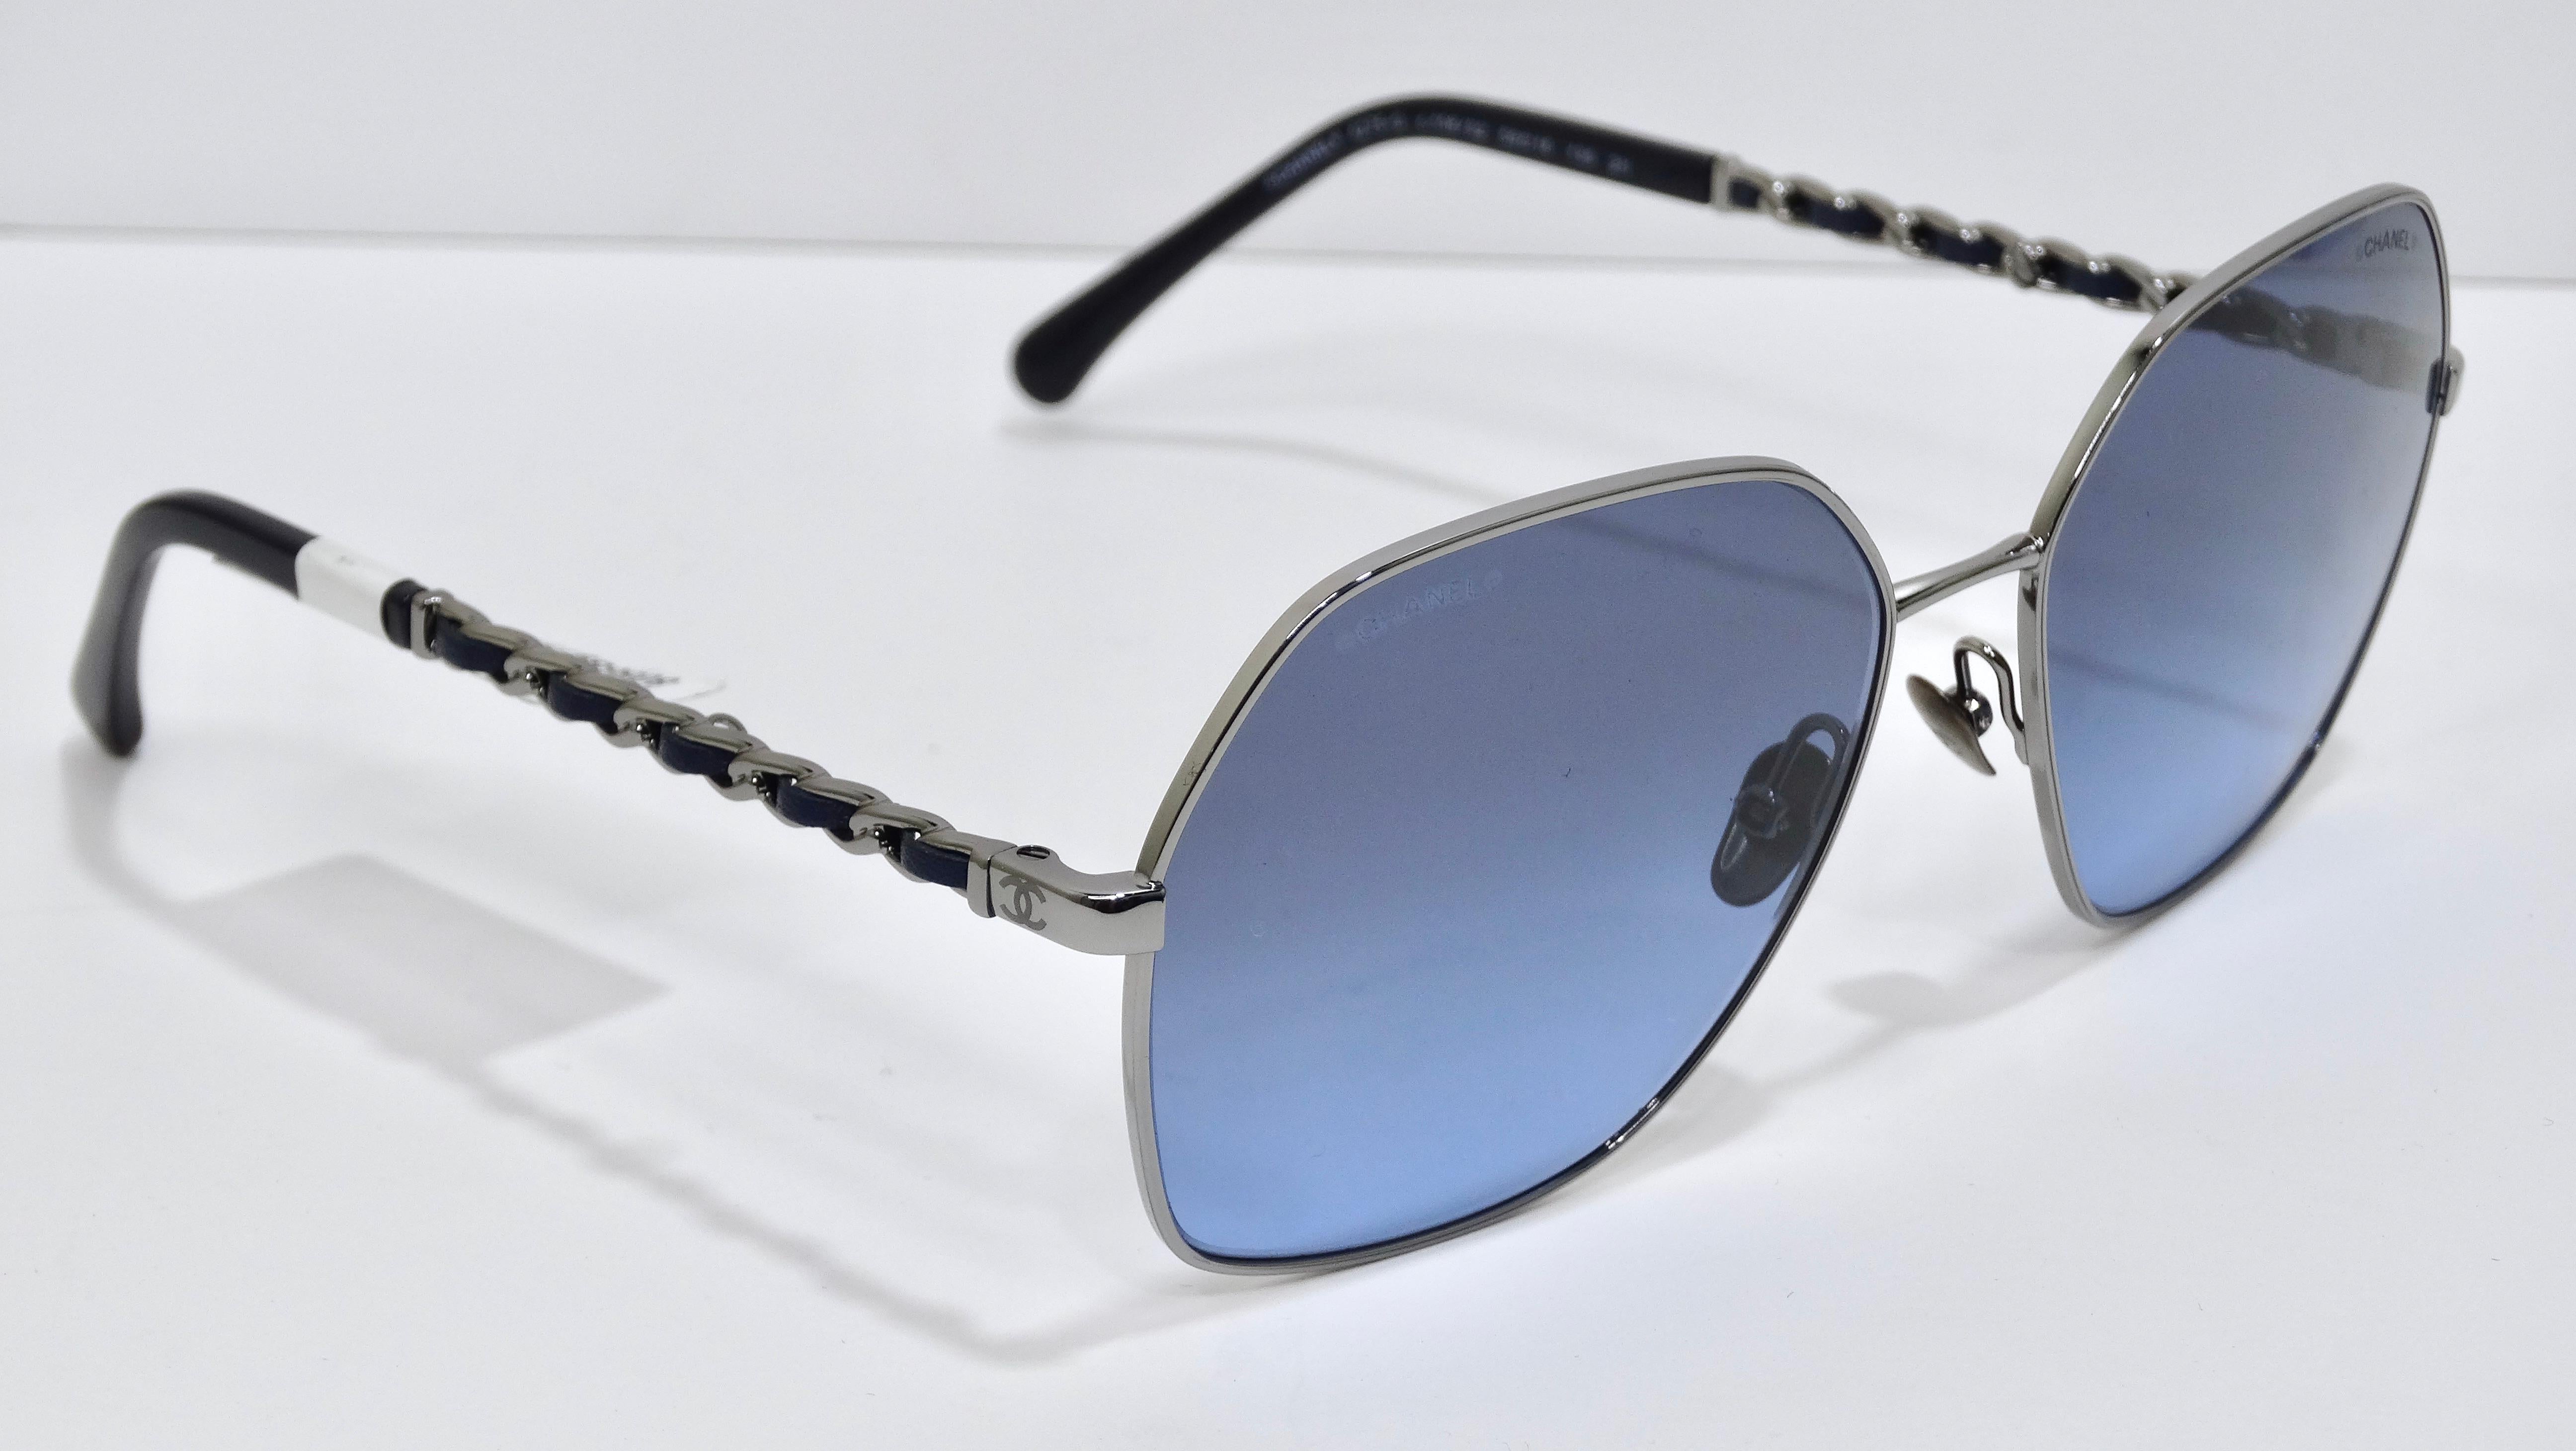 These sunglasses belong in your collection! These are brand NEW Chanel sunglasses, with the tags still attached. They are made with a sleek dark silver metal and blue gradient lenses. This unique pair of sunglasses comes with a removable